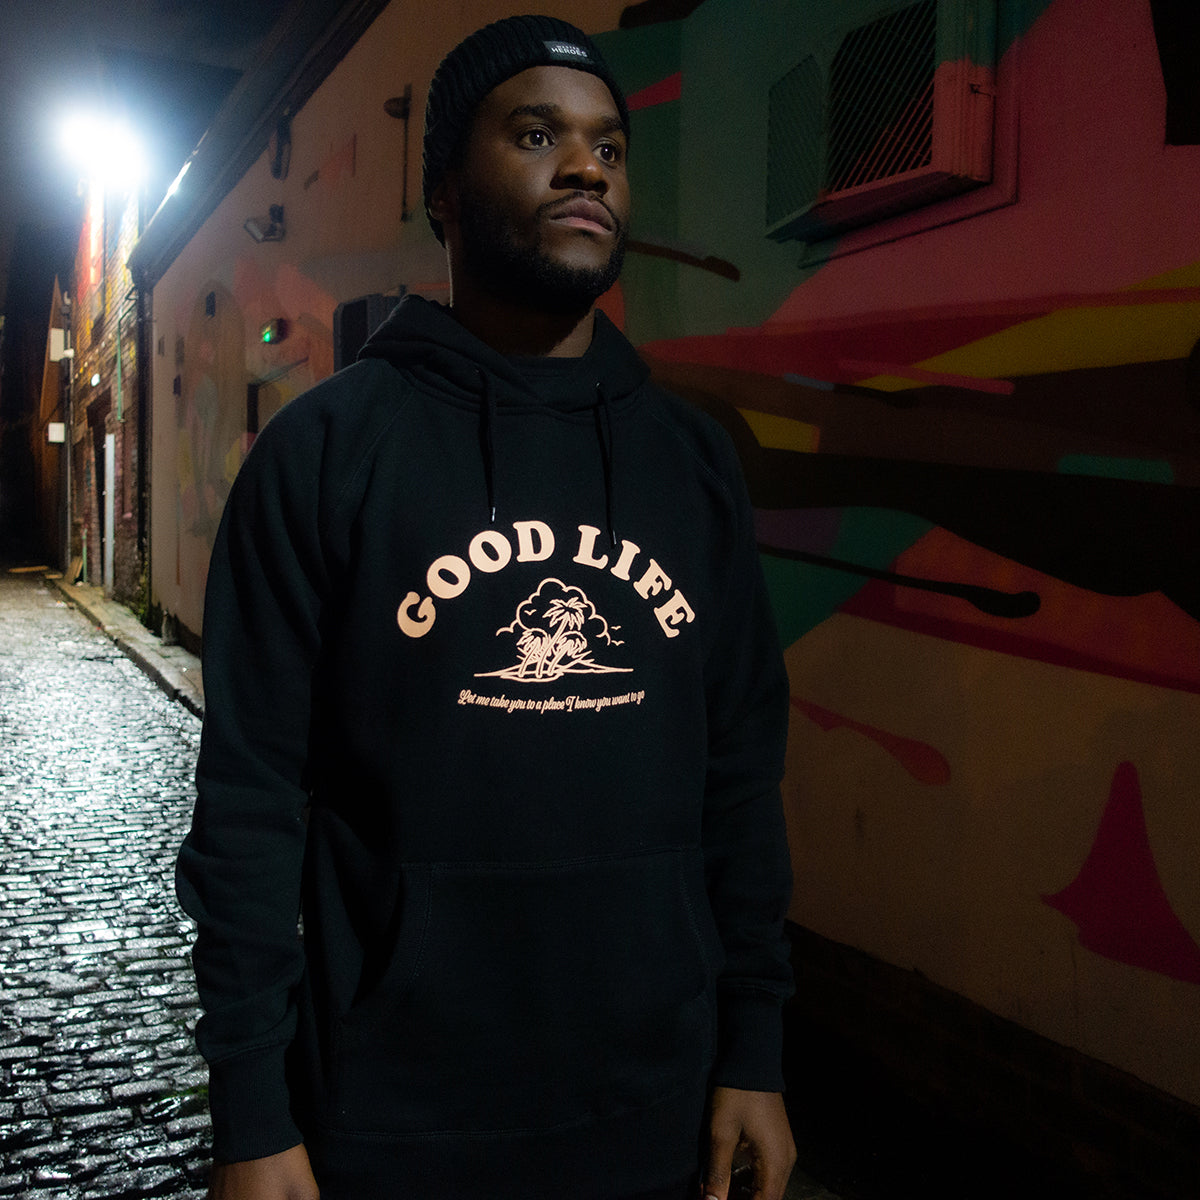 Good Life Front Print - Pullover Hood - Black - Wasted Heroes